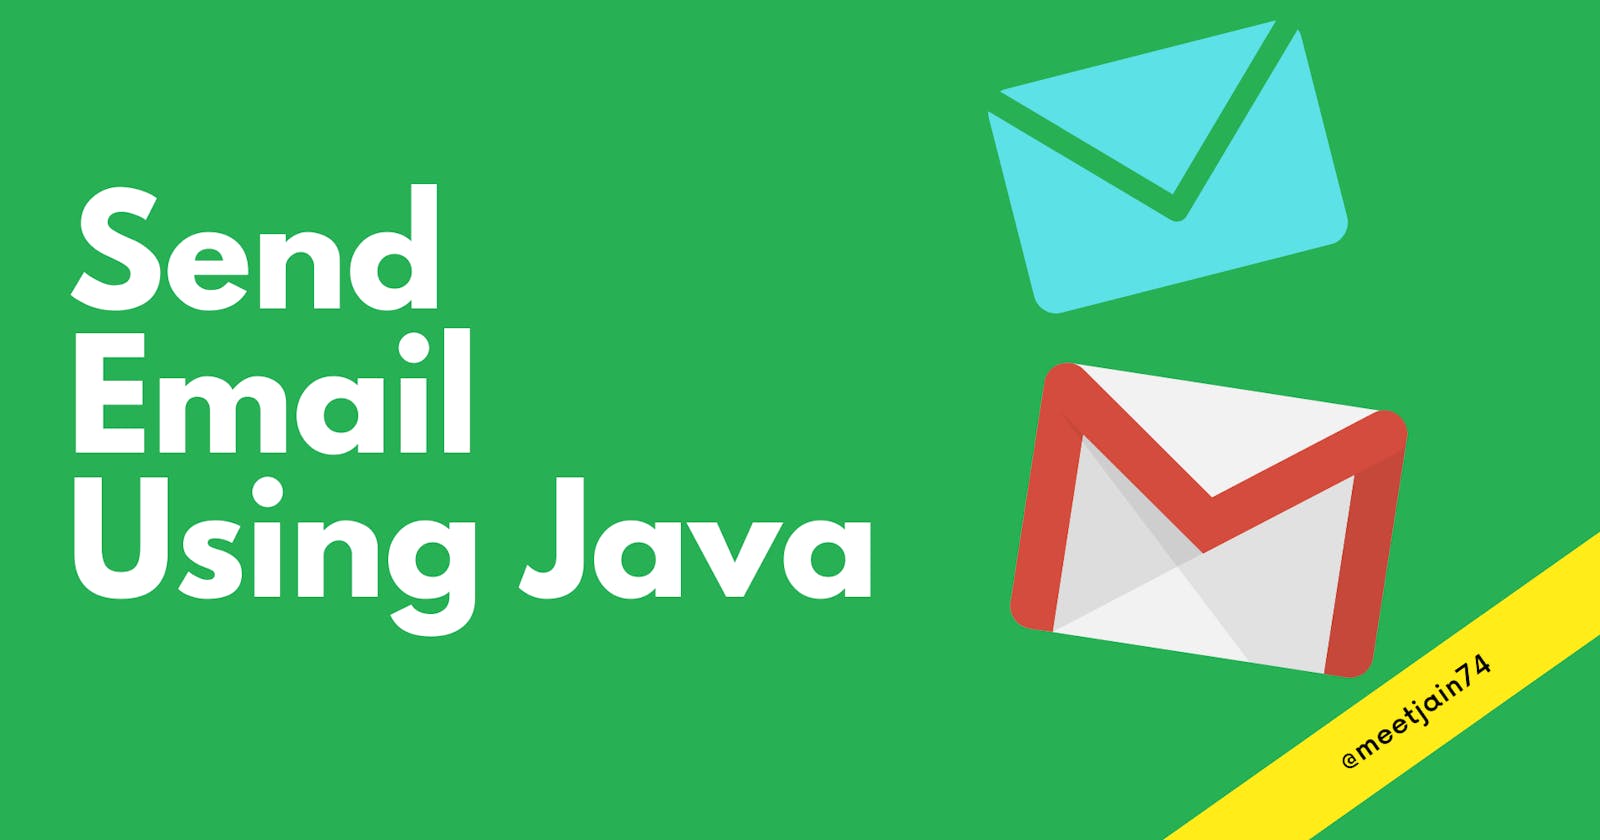 Send Email Using Java